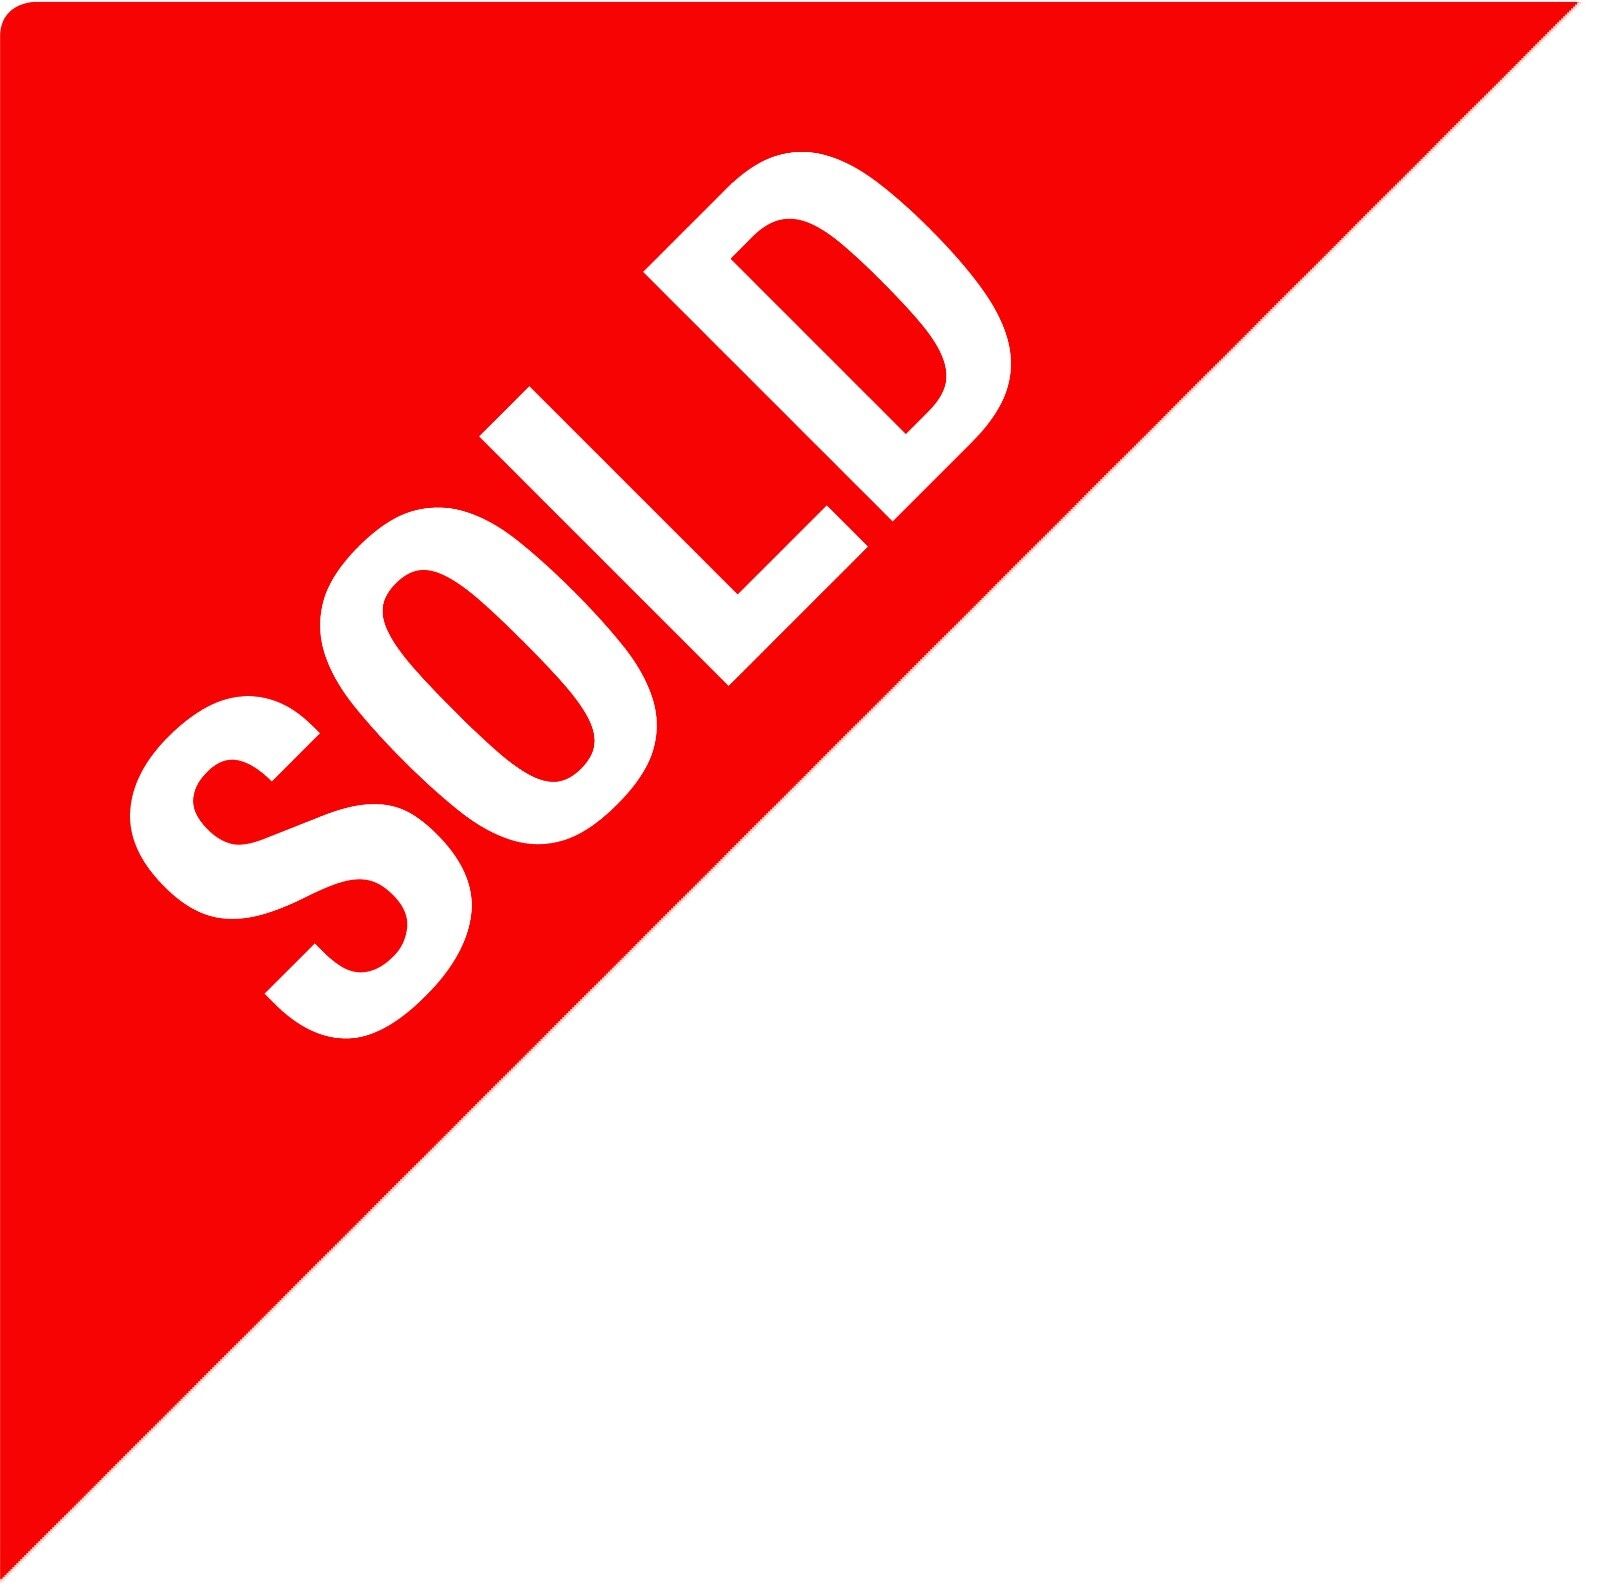 LET AGREED - Estate Agents Stickers - Triangles - SALE agreed - NOW let - SOLD